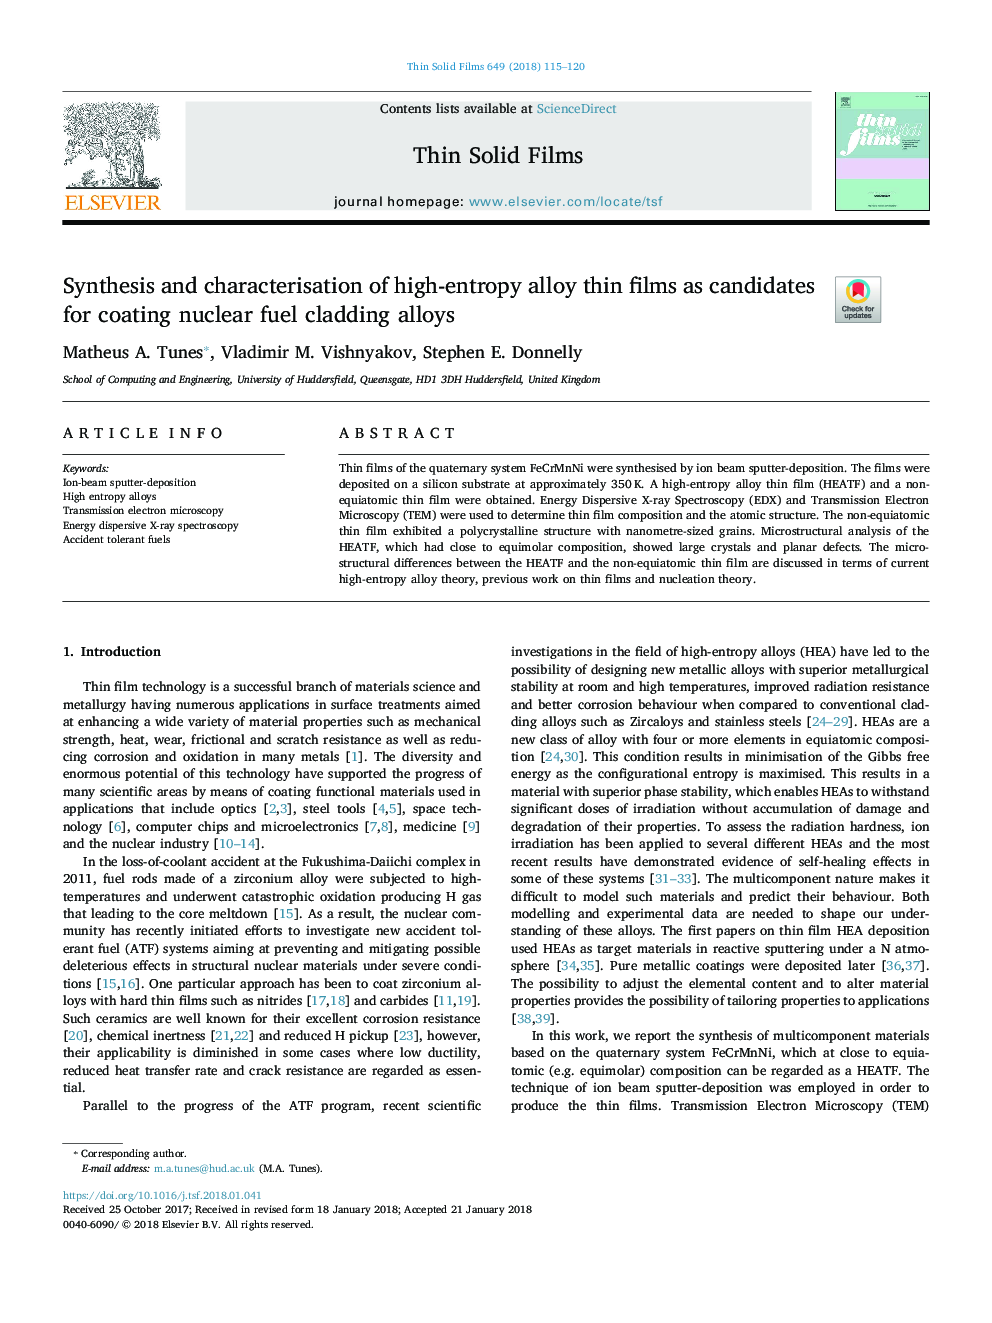 Synthesis and characterisation of high-entropy alloy thin films as candidates for coating nuclear fuel cladding alloys